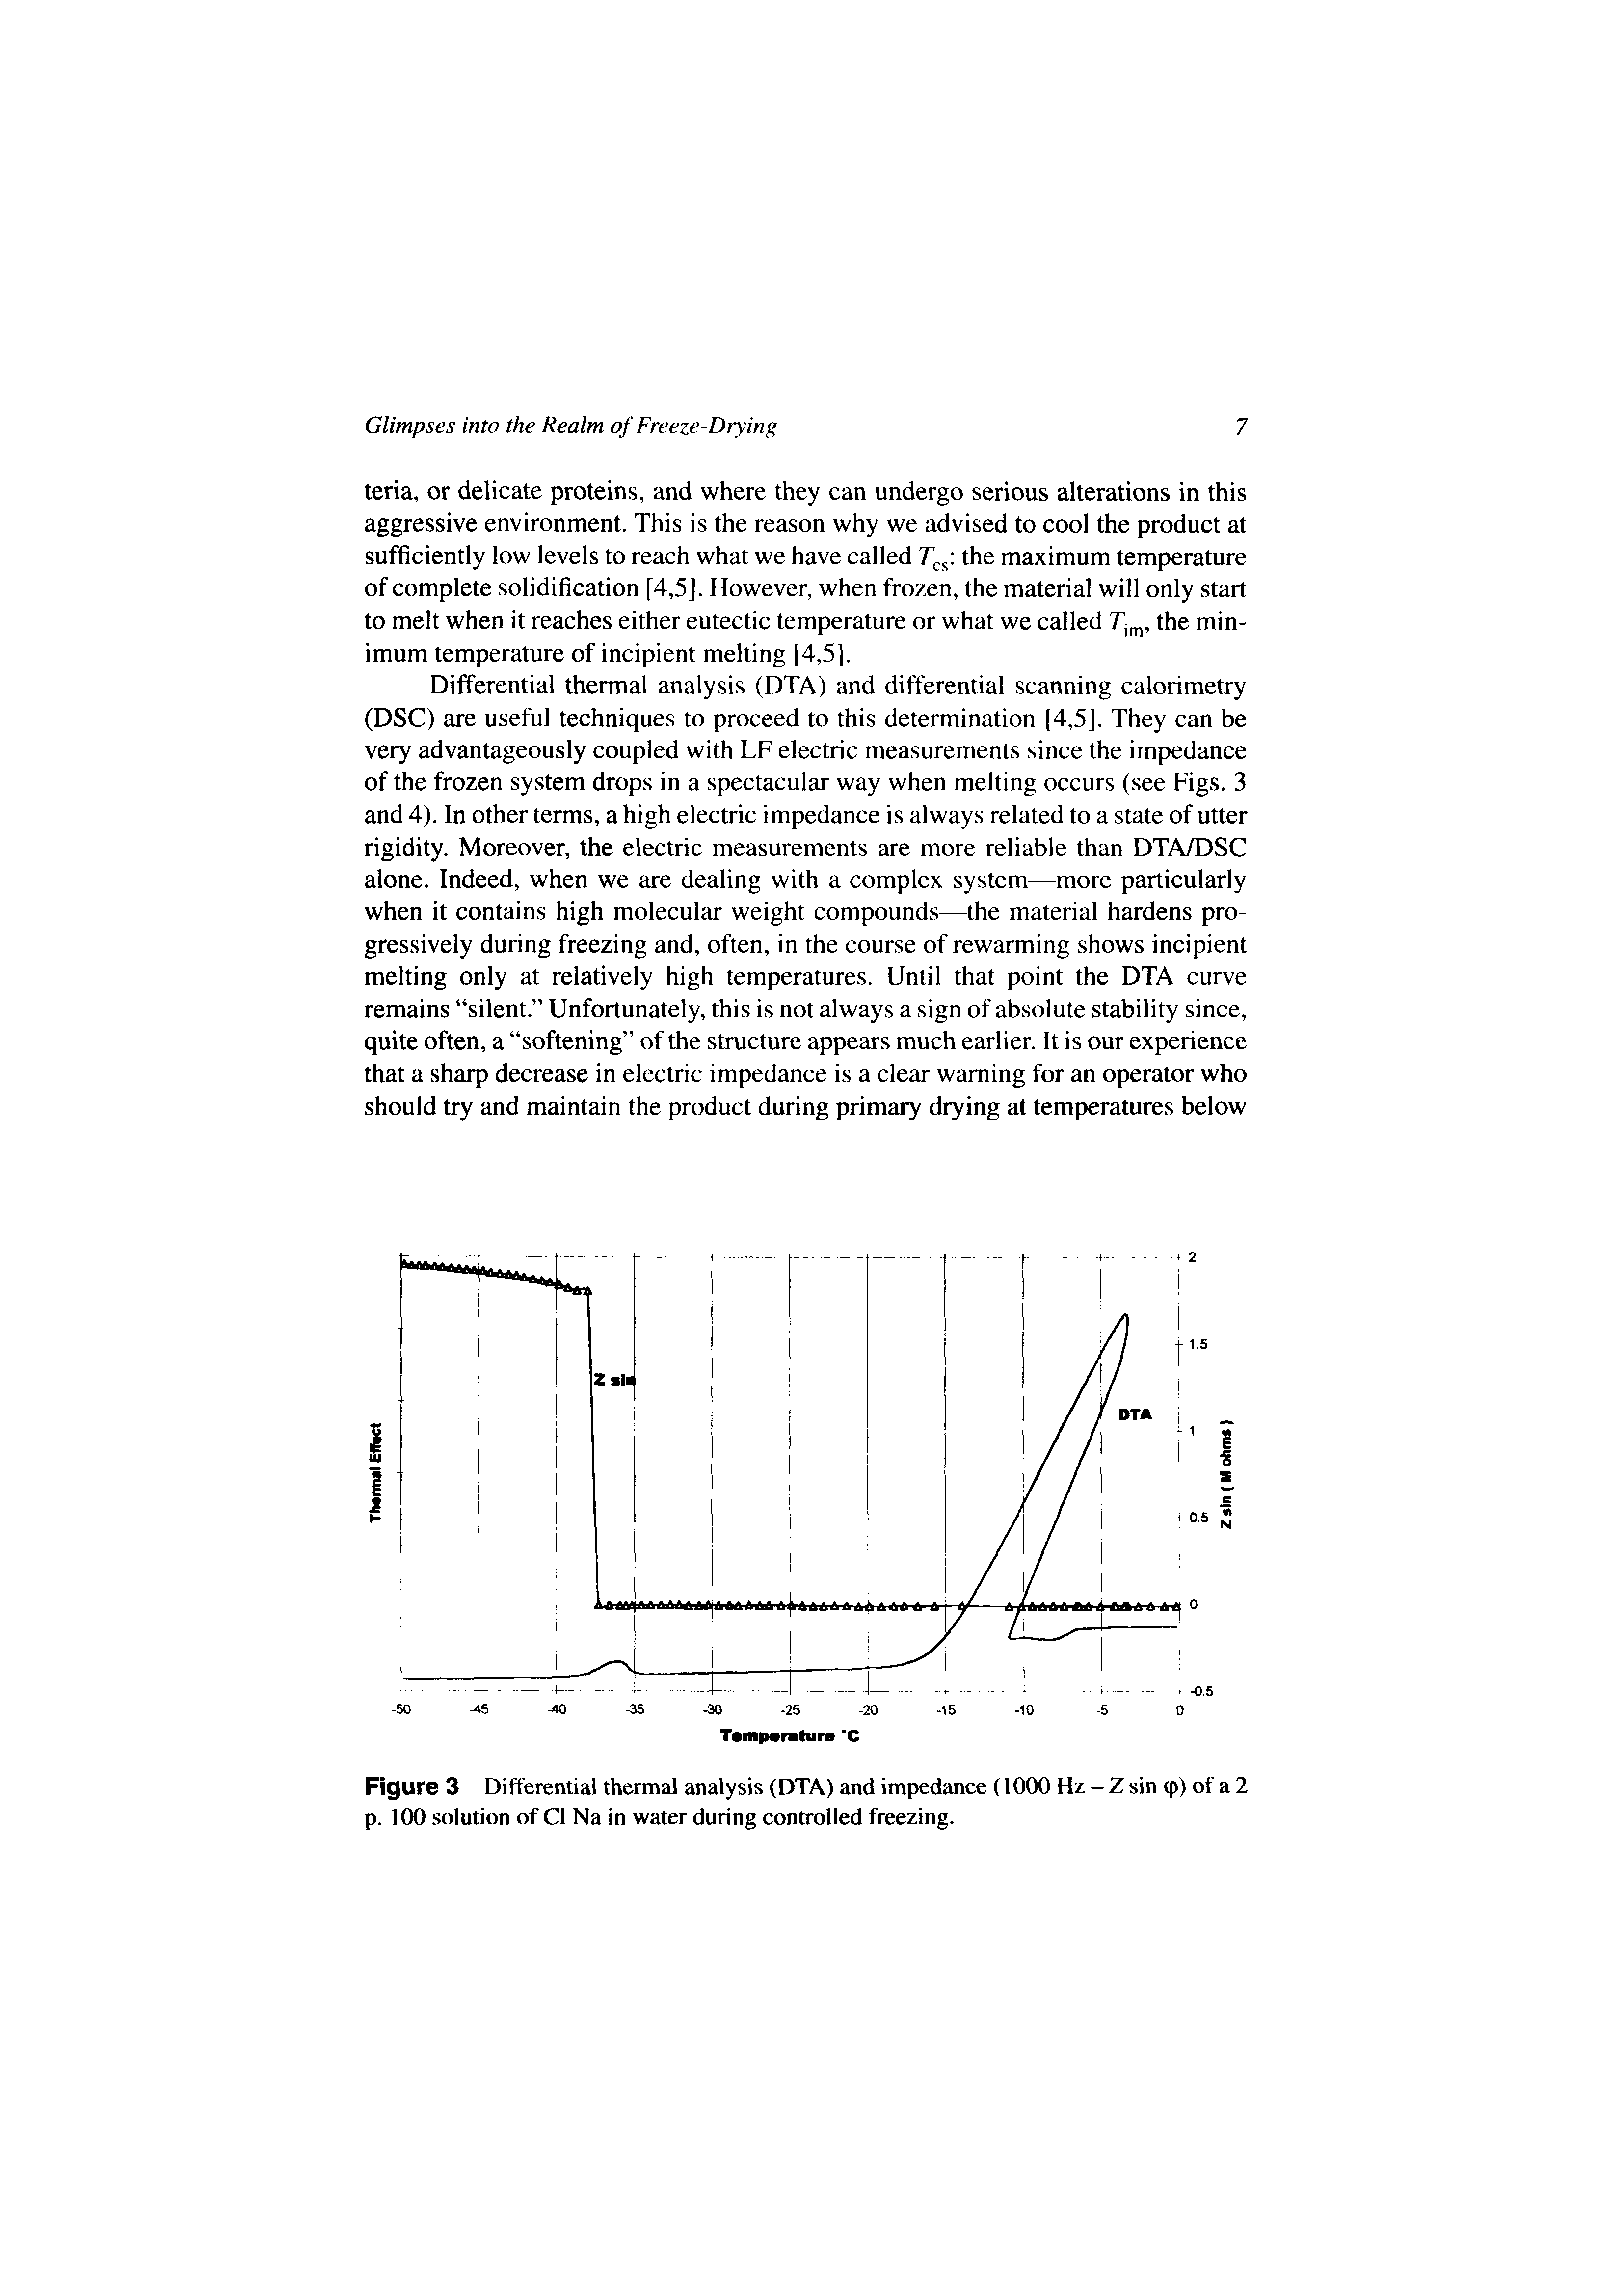 Figure 3 Differential thermal analysis (DTA) and impedance (1000 Hz - Z sin (p) of a 2 p. 100 solution of Cl Na in water during controlled freezing.